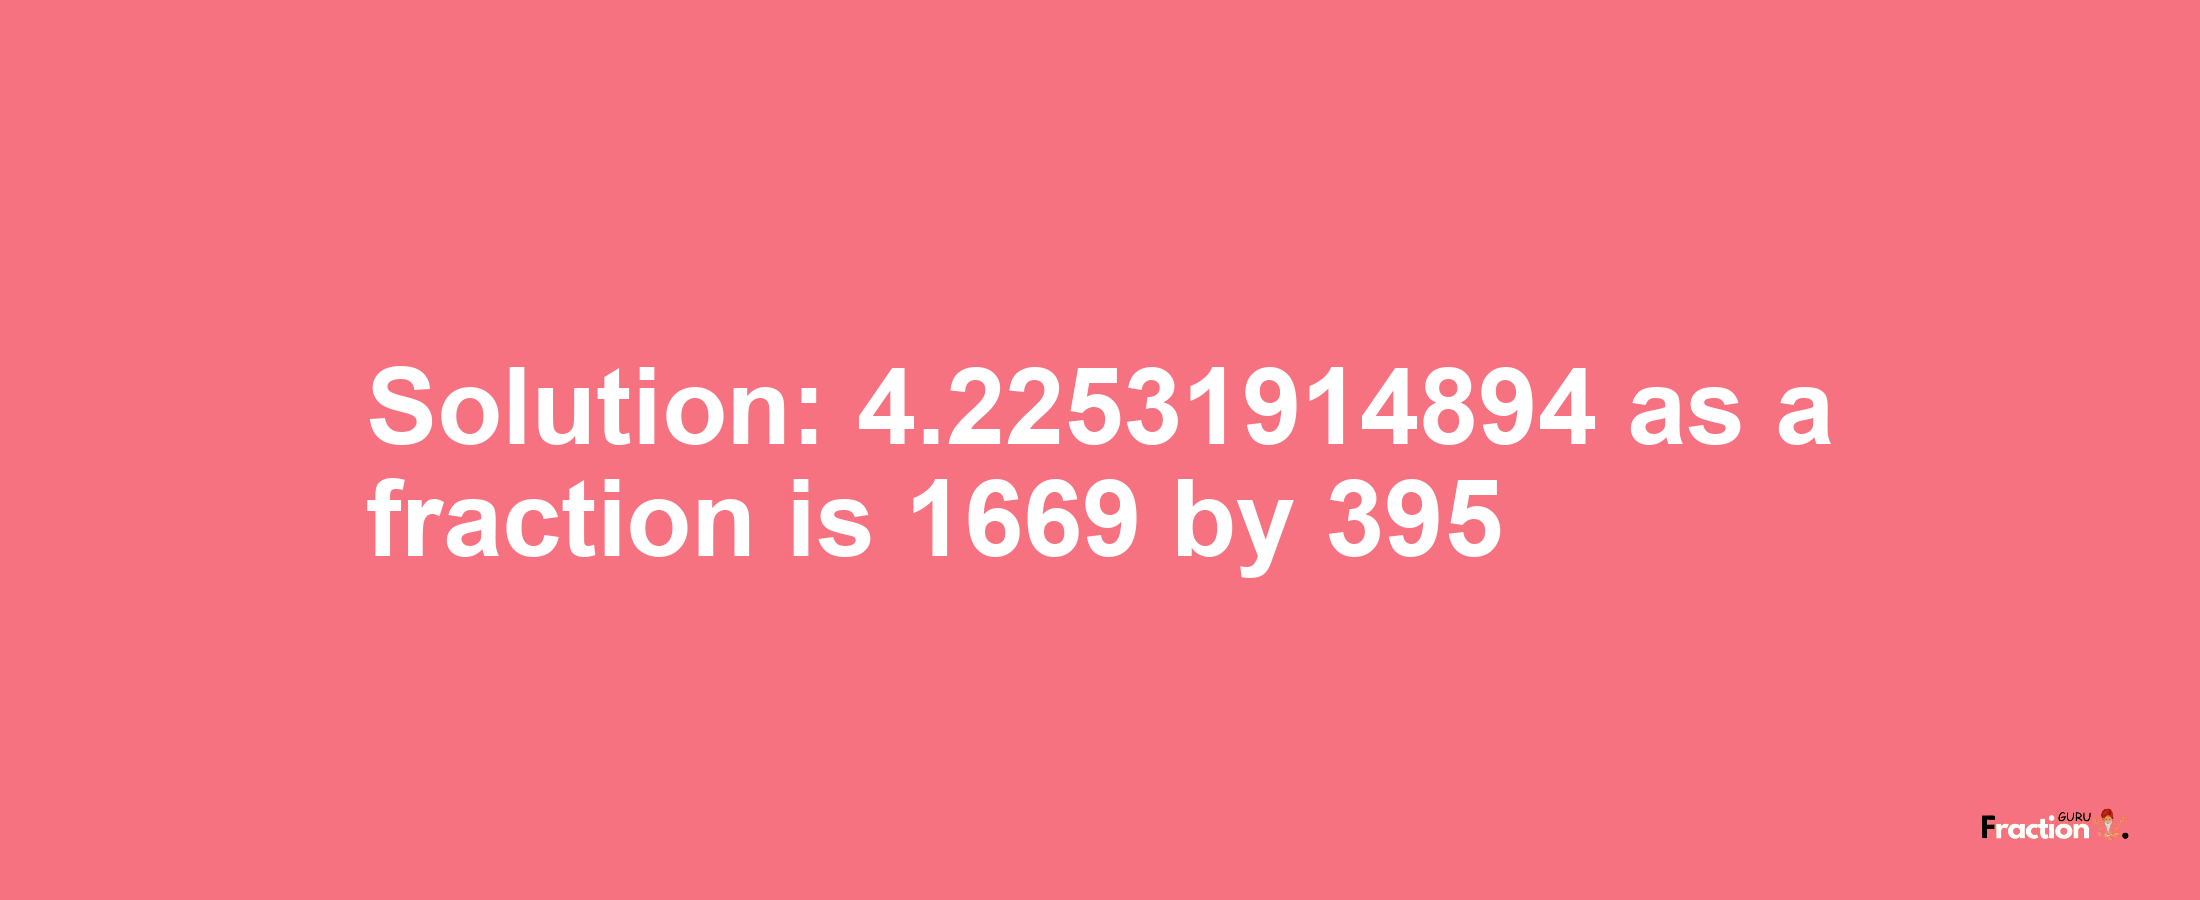 Solution:4.22531914894 as a fraction is 1669/395